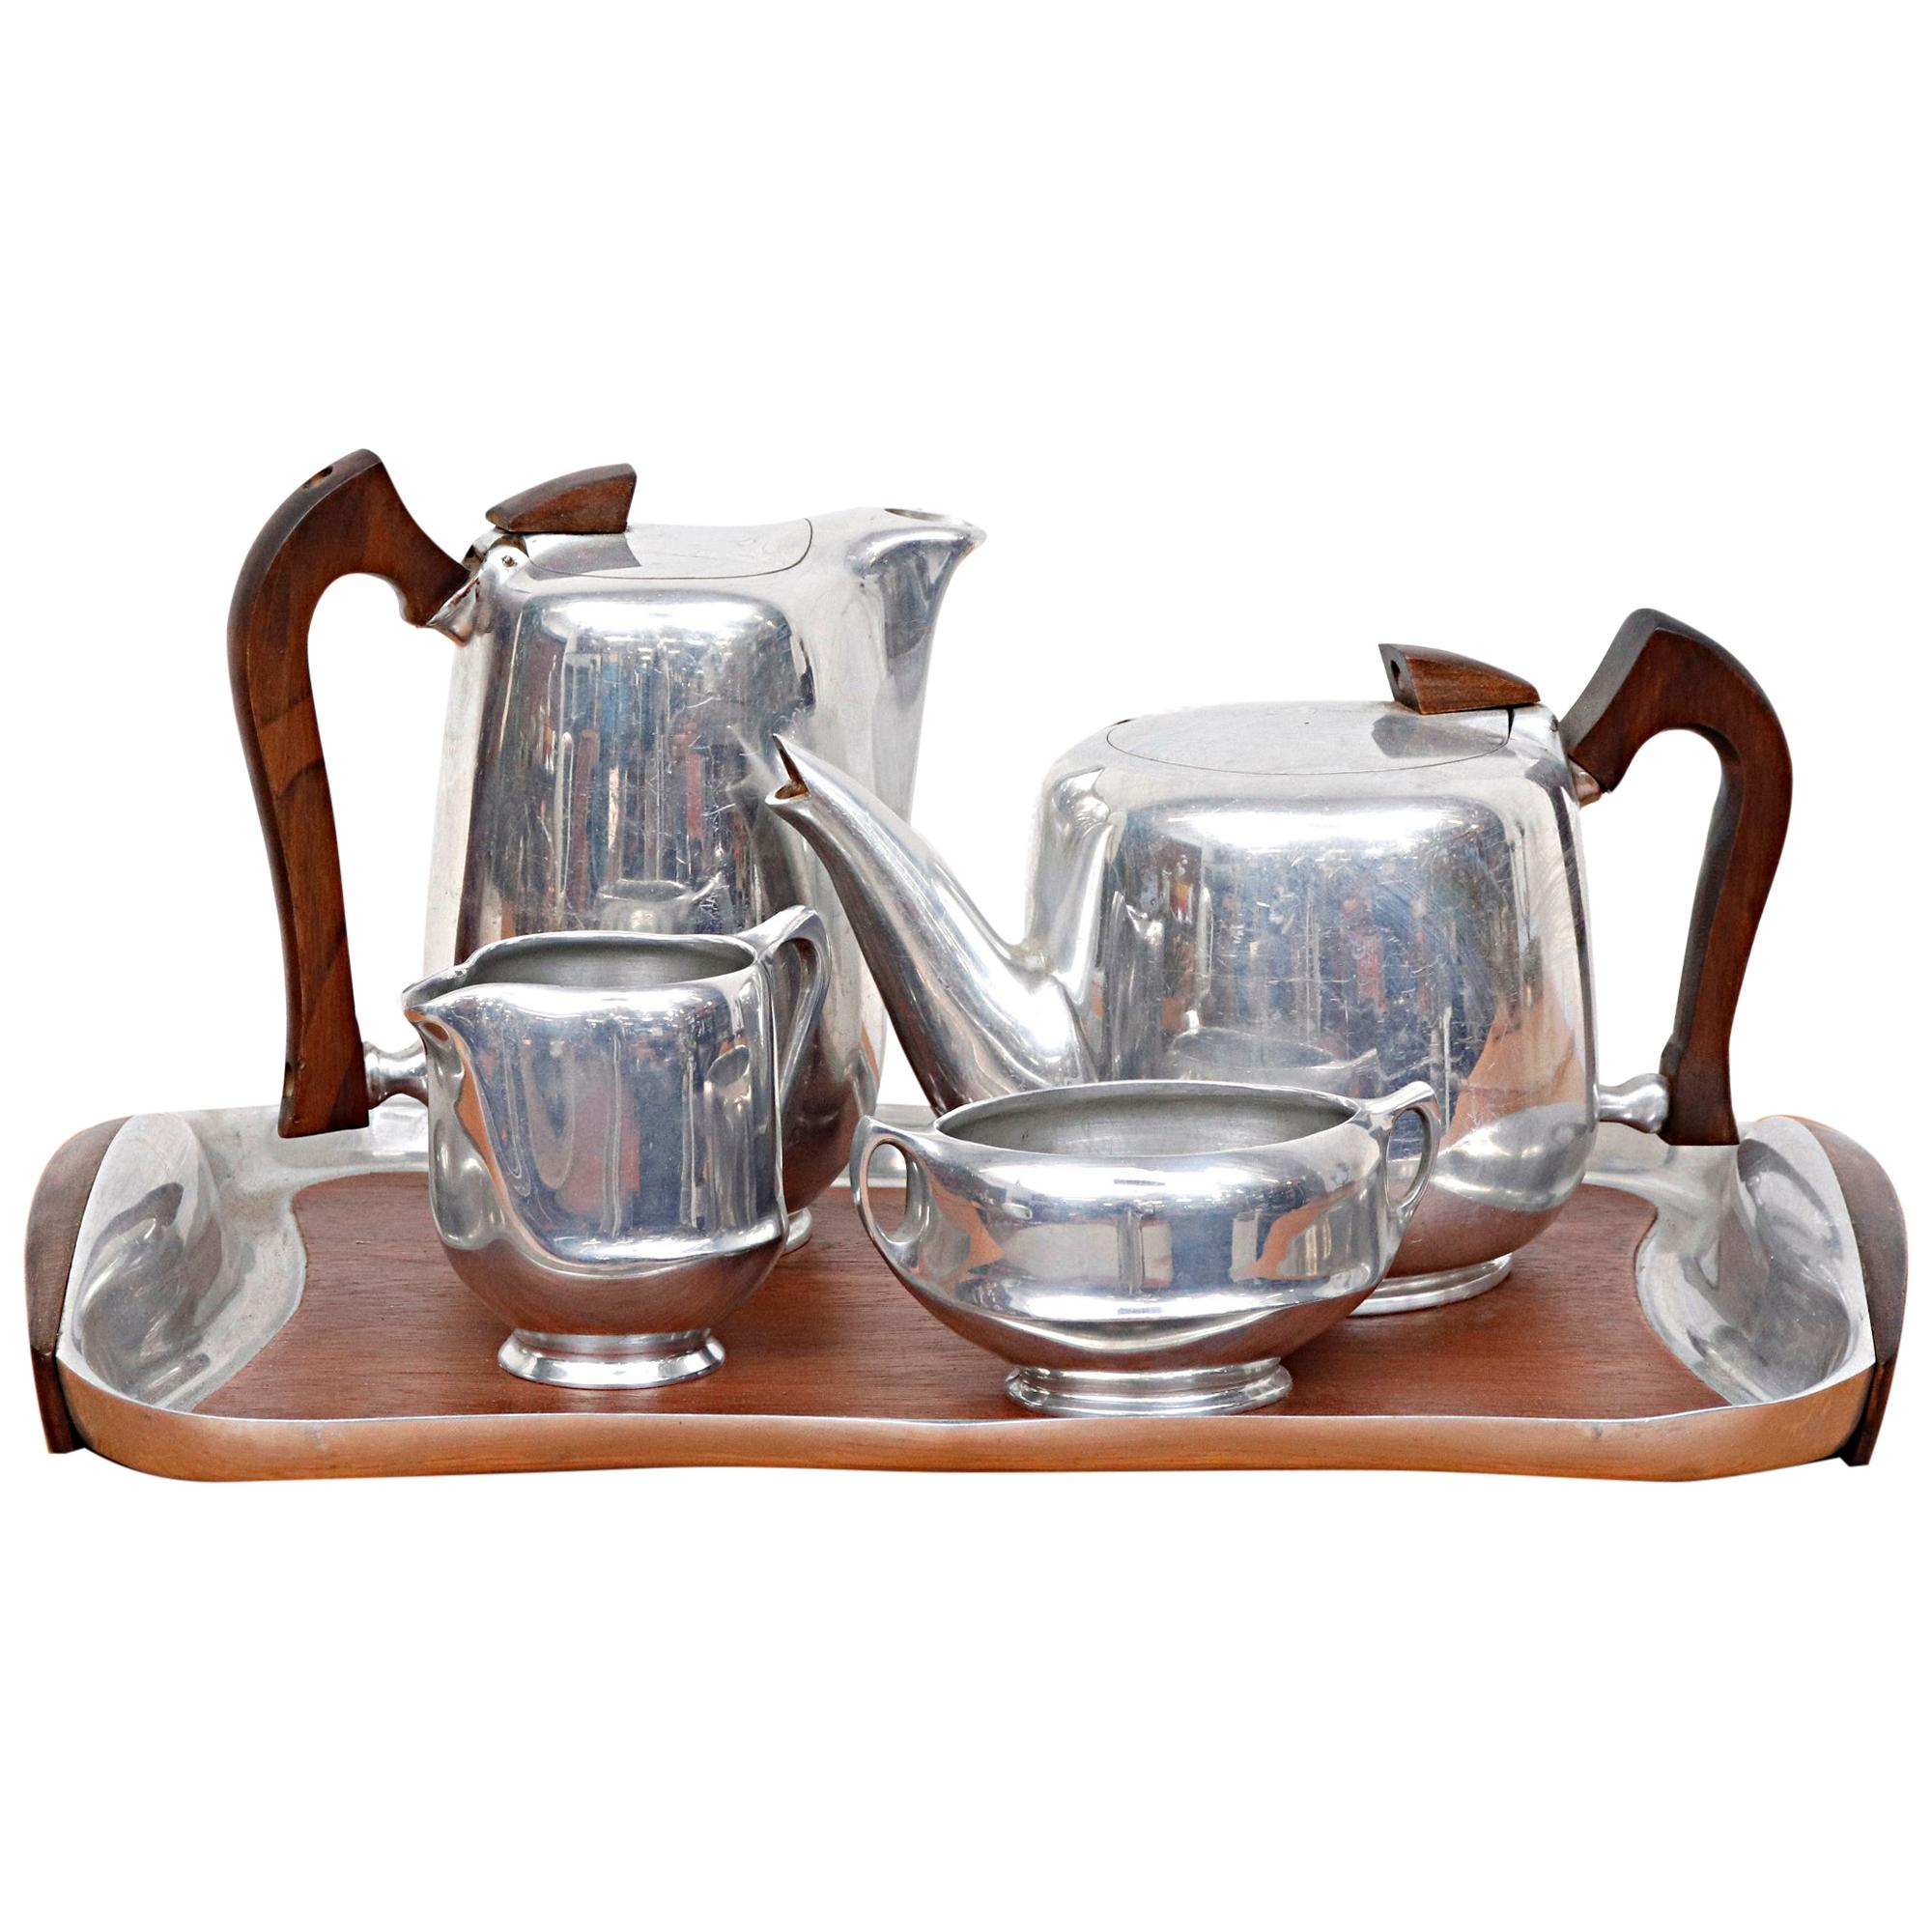 Midcentury Coffee and Tea Service Set by Picquot Ware, 1950s